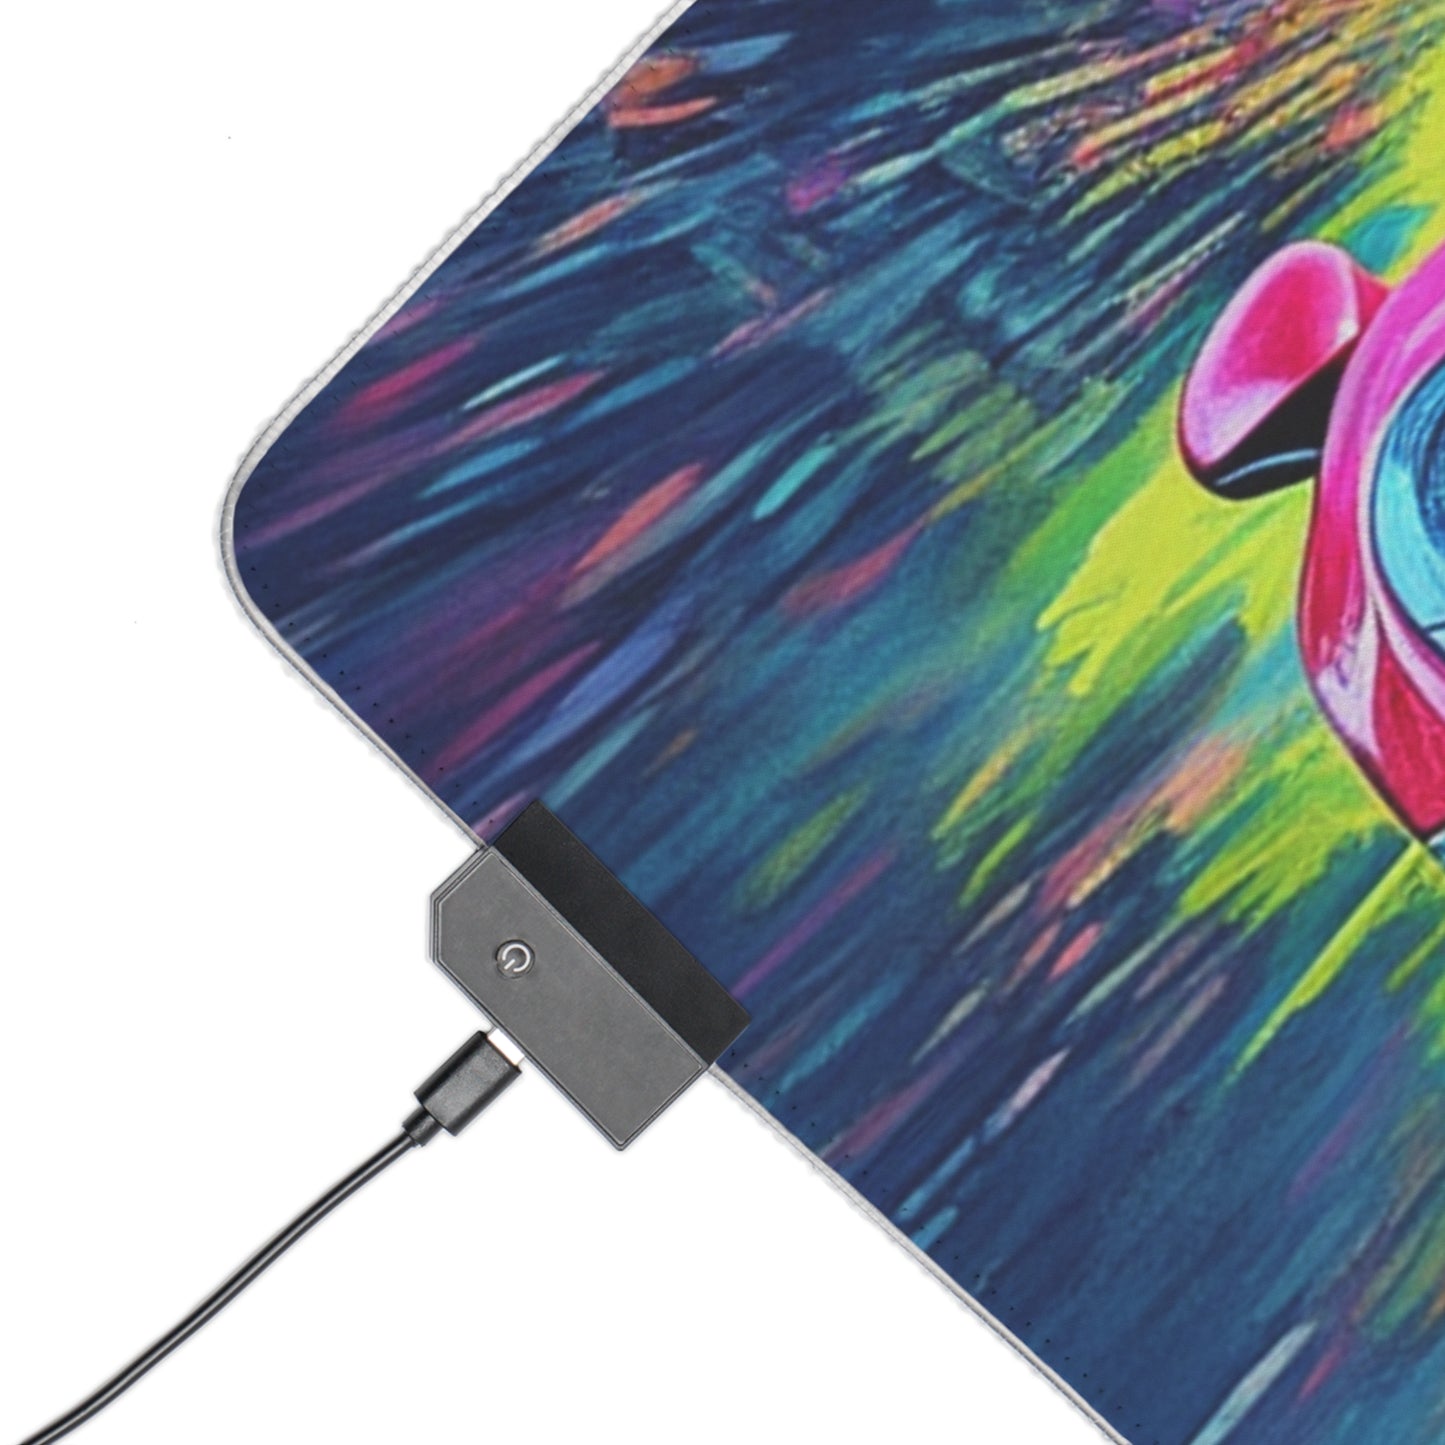 LED Gaming Mouse Pad Pink Porsche water fusion 3